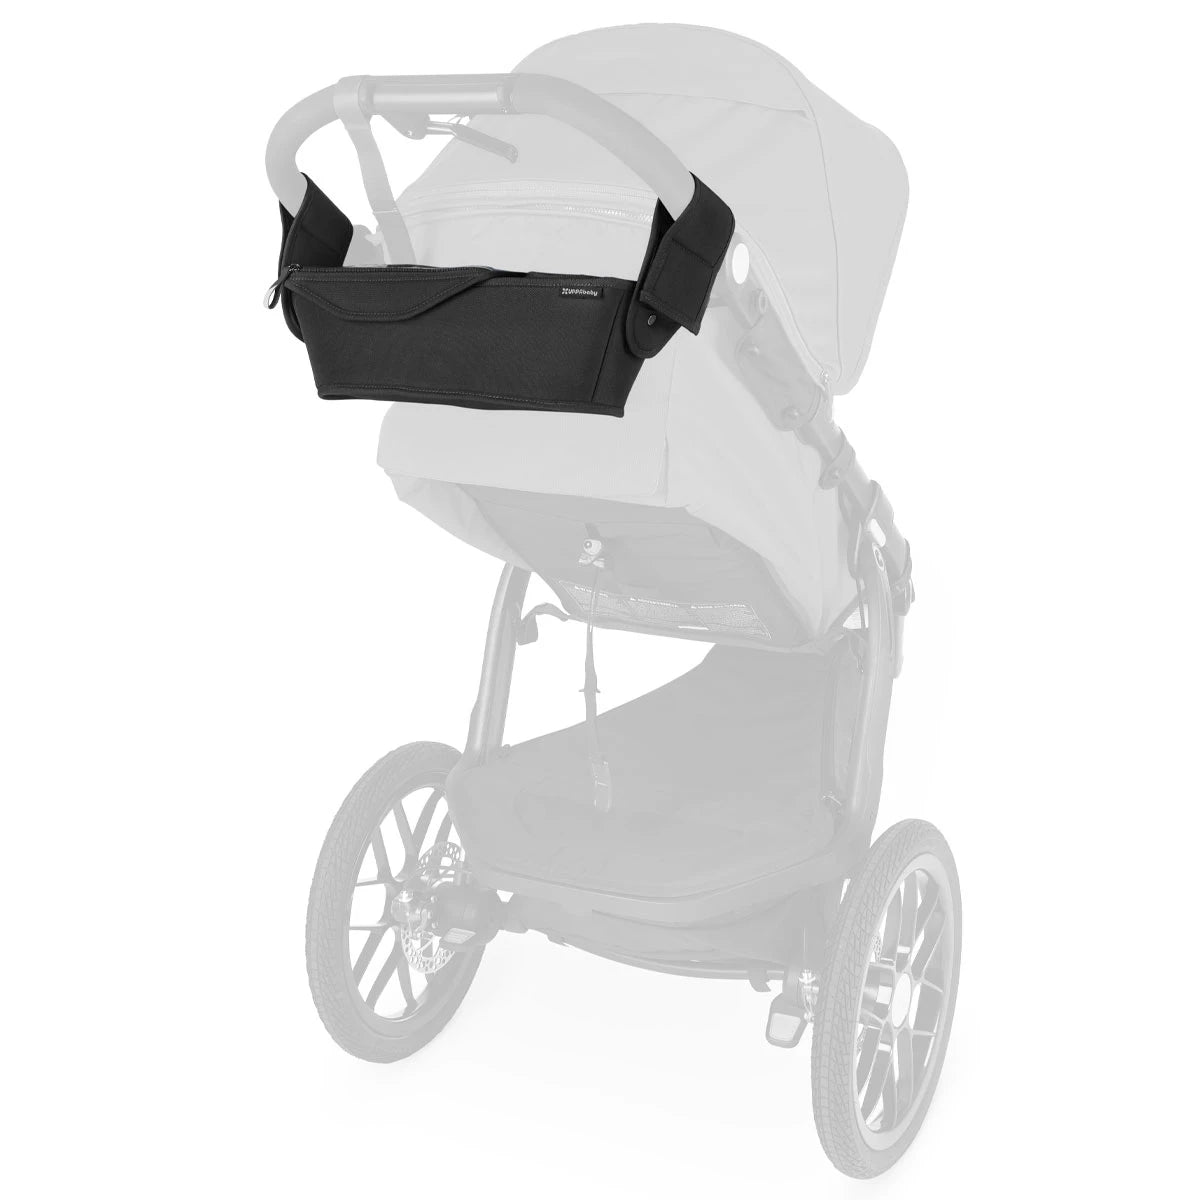 UPPAbaby Parent Console for RIDGE 2